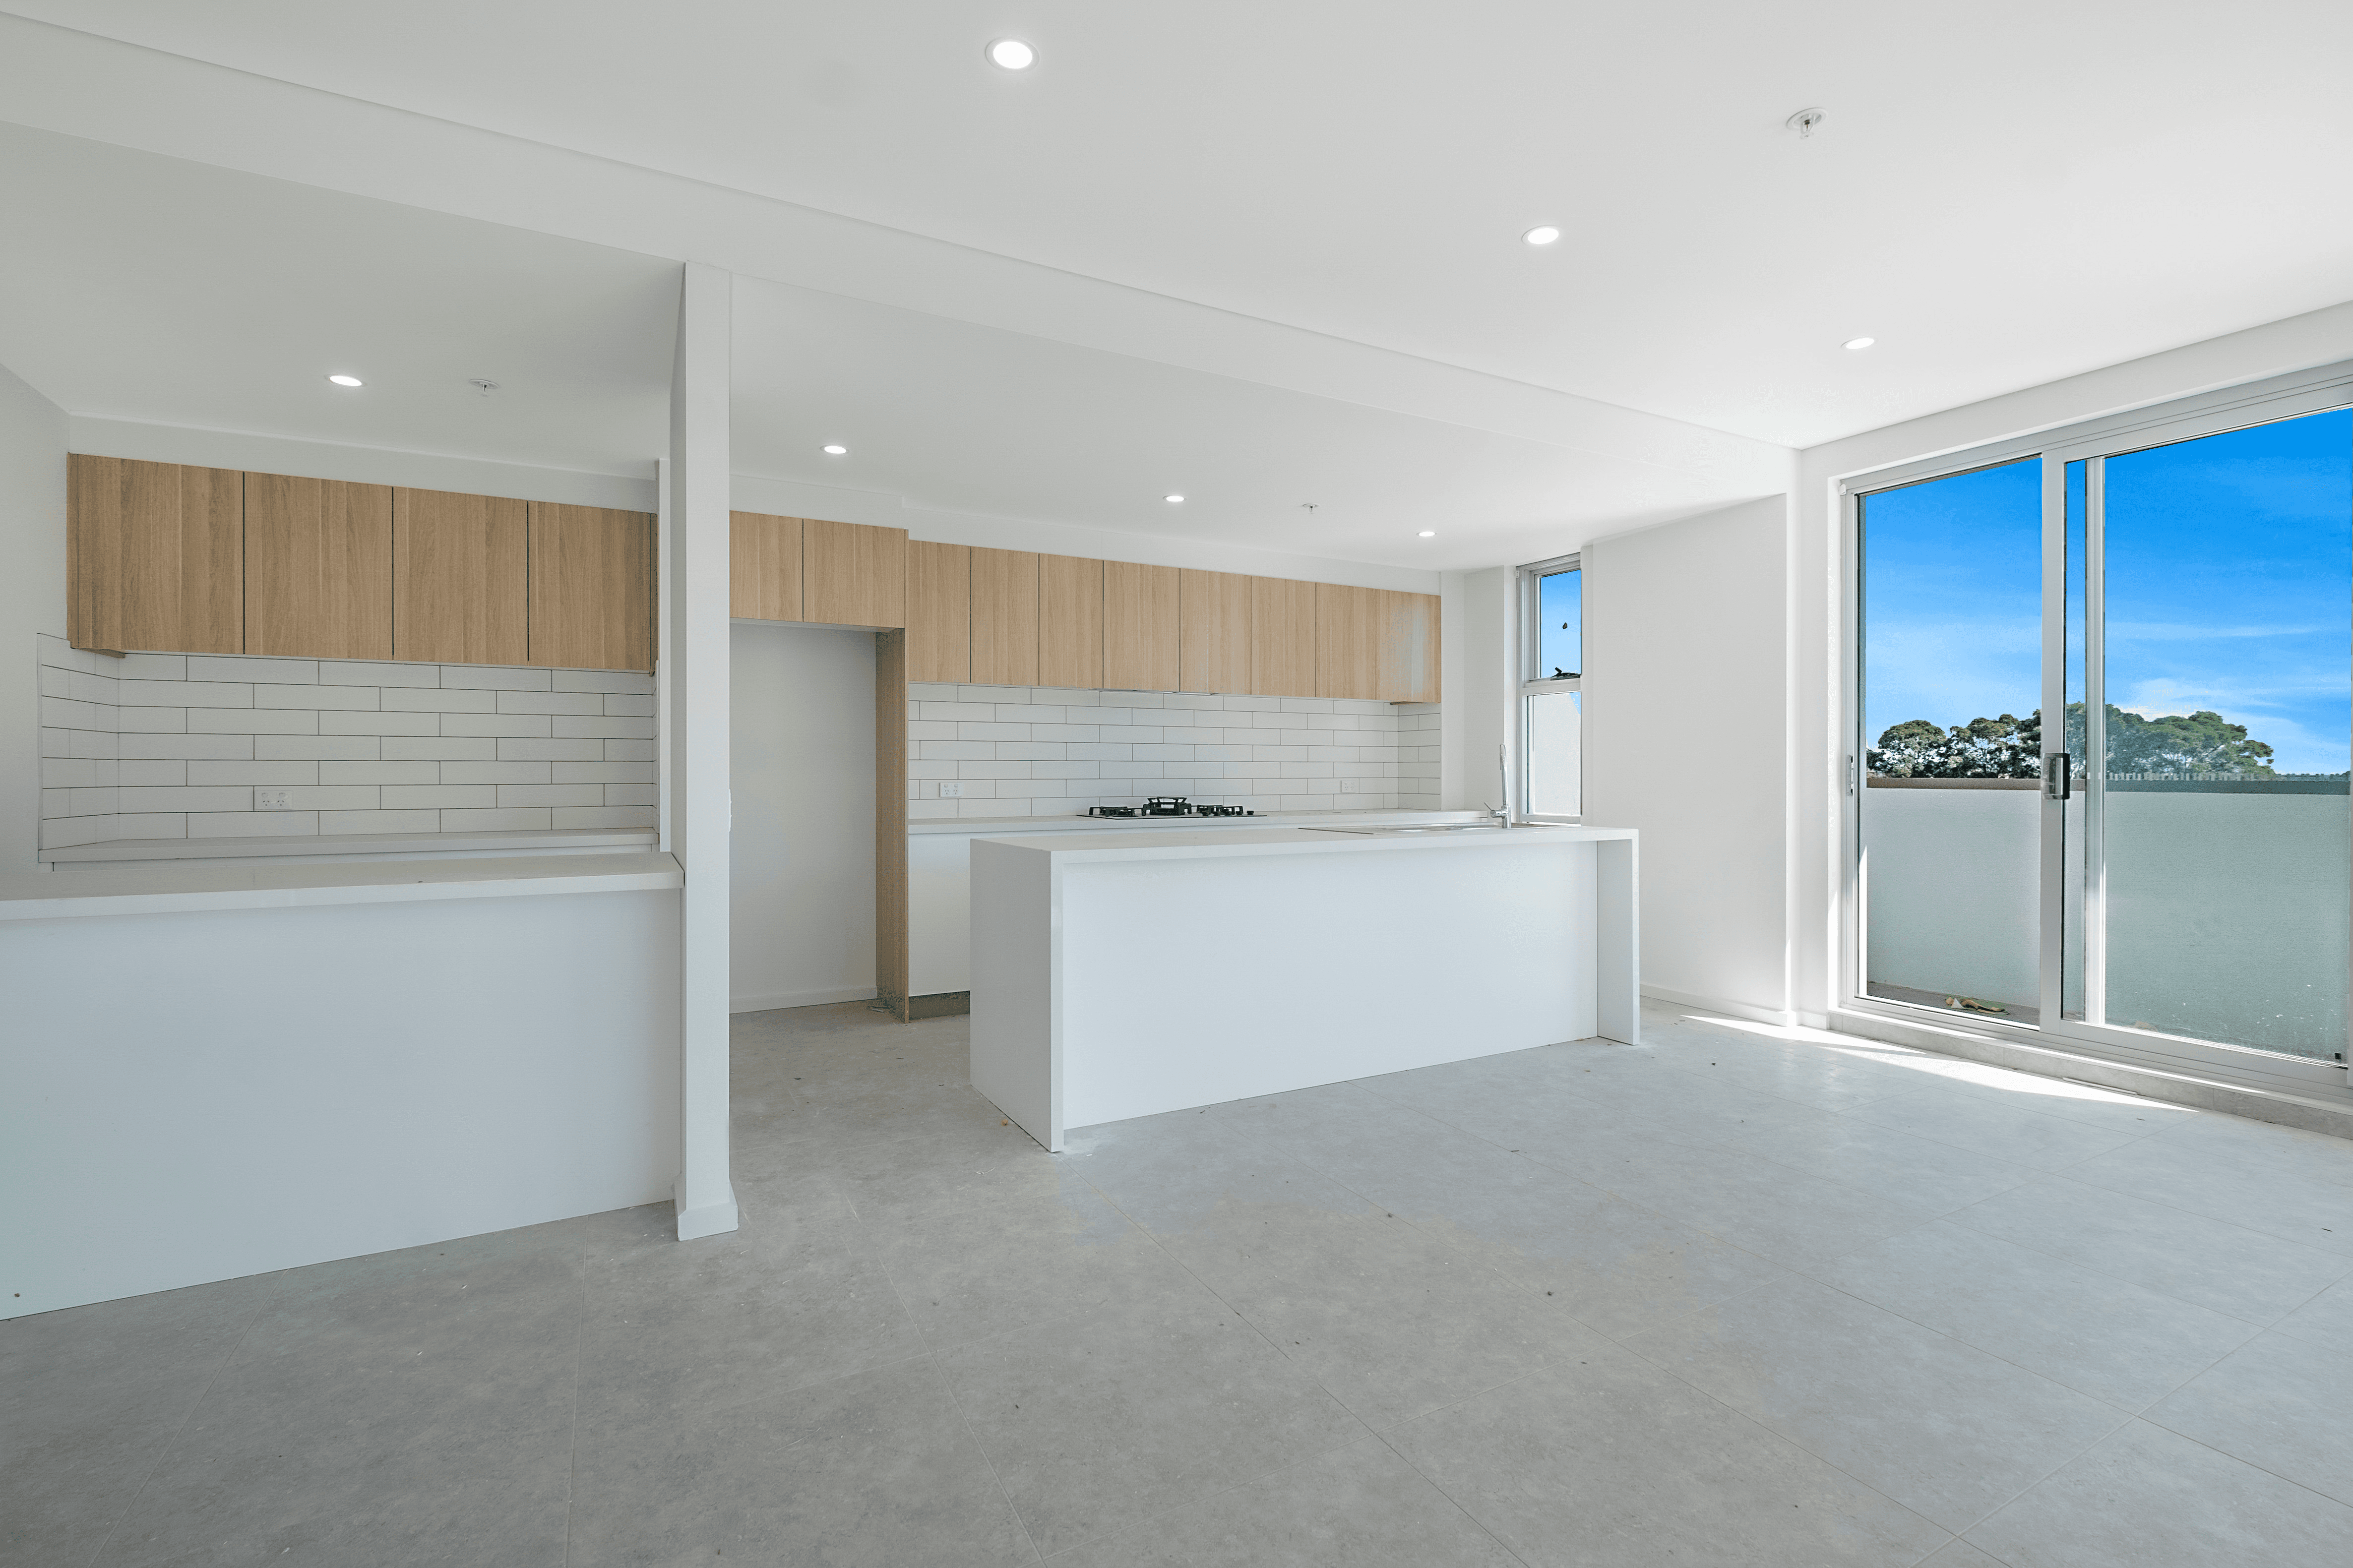 401/42 Armbruster Avenue, NORTH KELLYVILLE, NSW 2155